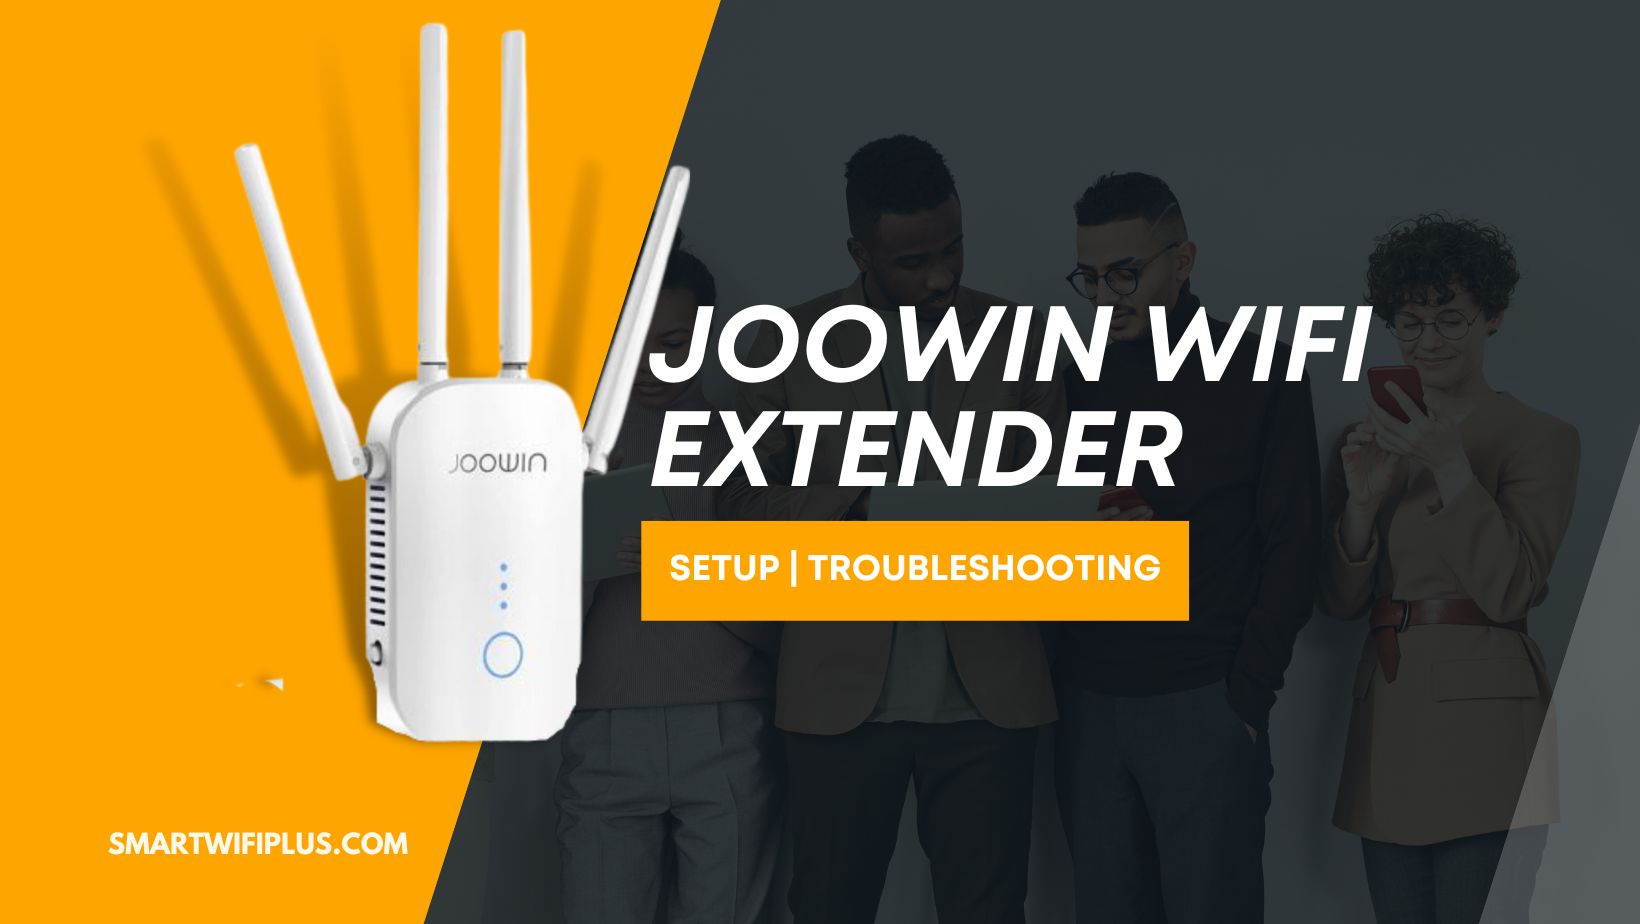 How to set up a Joowin WIFI extender?